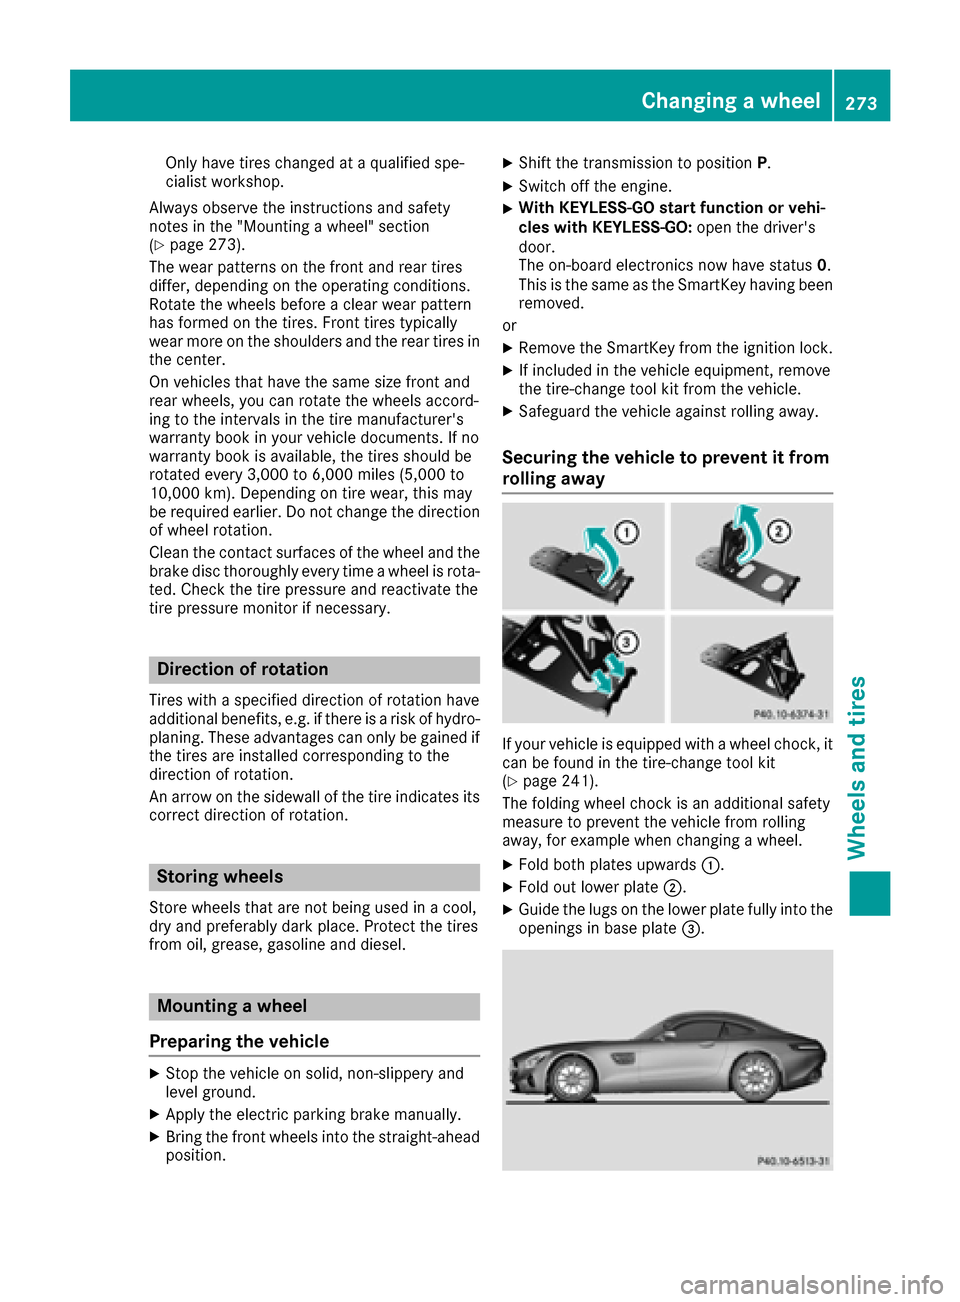 MERCEDES-BENZ AMG GT S 2016 C190 Owners Manual Only have tires changed at a qualified spe-
cialist workshop.
Always observe the instructions and safety
notes in the "Mounting a wheel" section
(
Ypage 273).
The wear patterns on the front and rear t